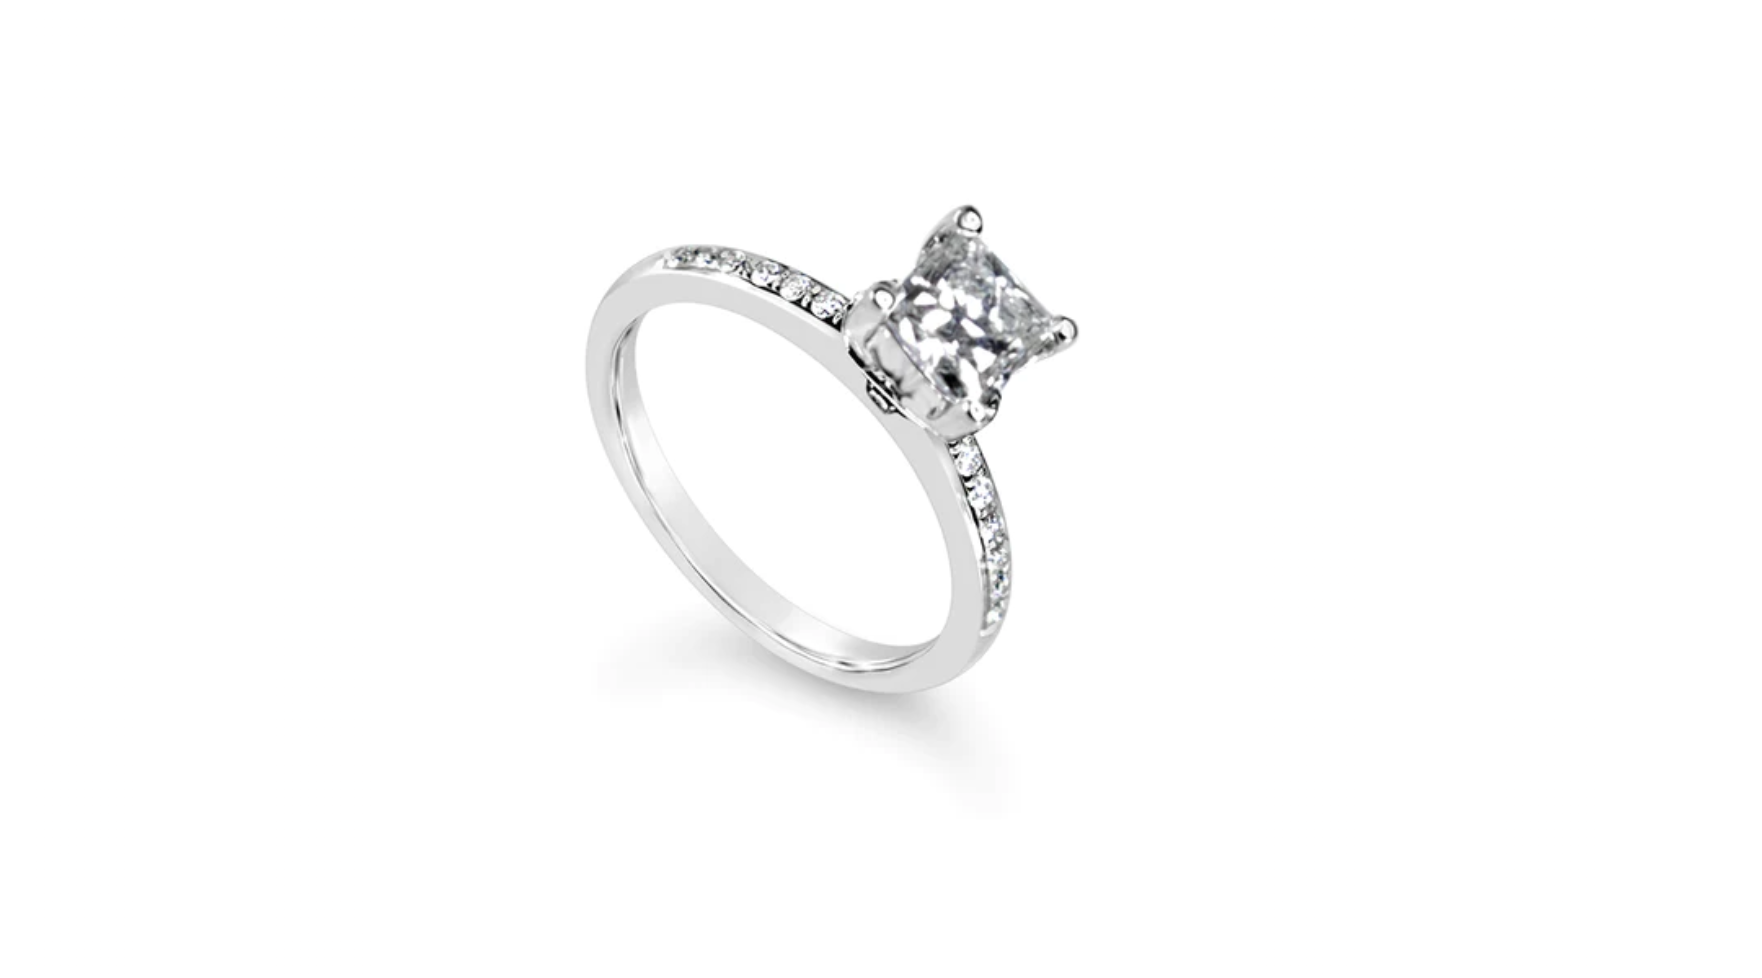 A white gold engagement ring with a 0.50-carat-diamond